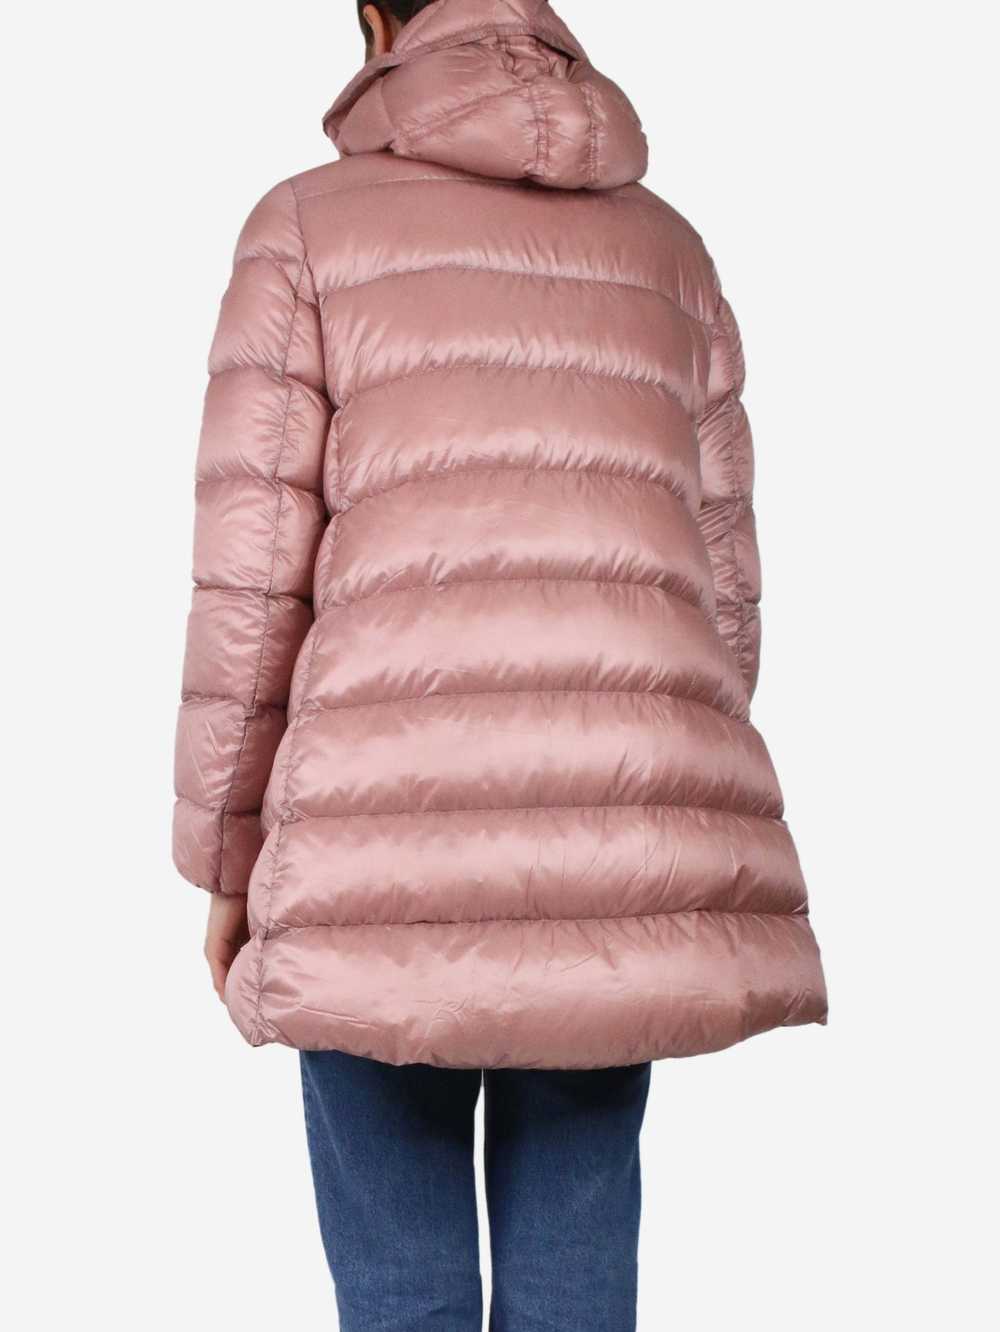 Moncler Pink puffer coat - size 2 - image 5